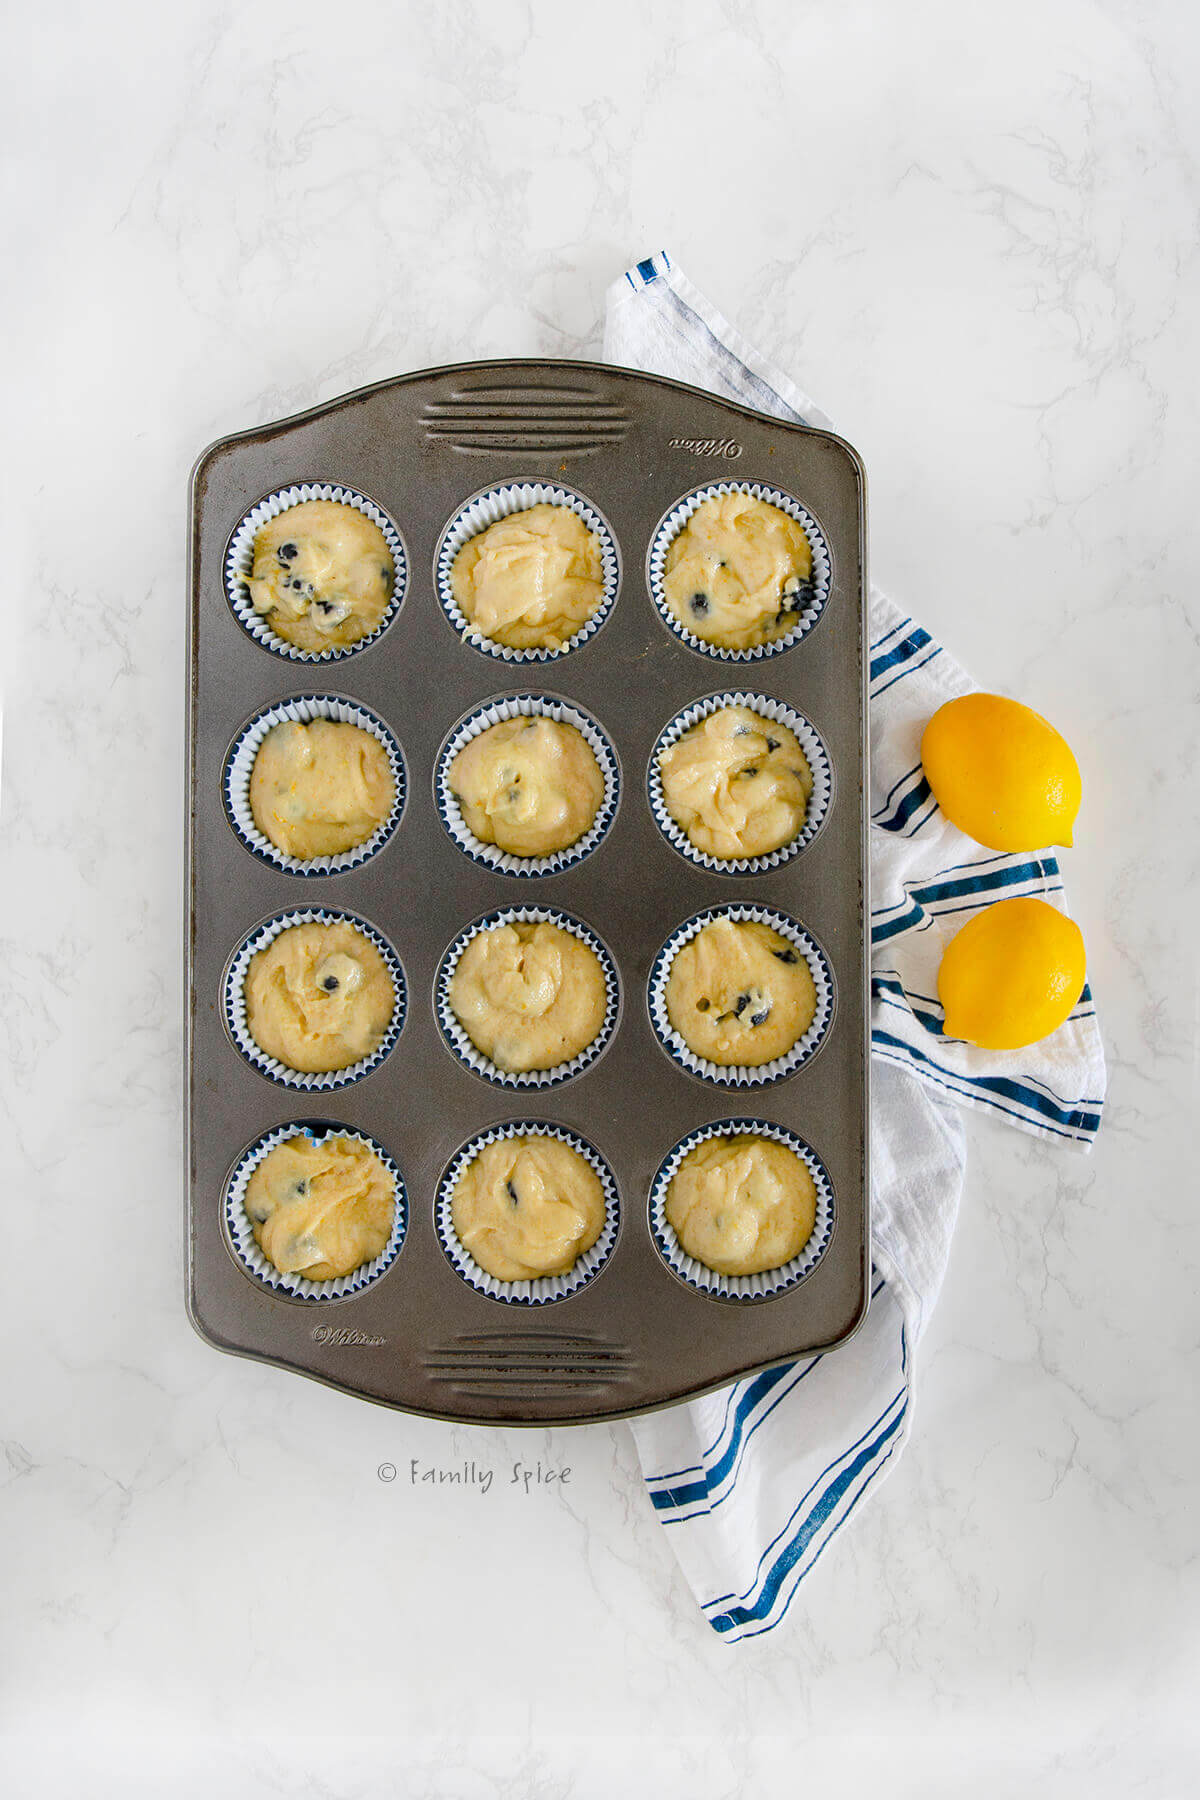 Blueberry muffin batter in cupcake liners in a cupcake pan